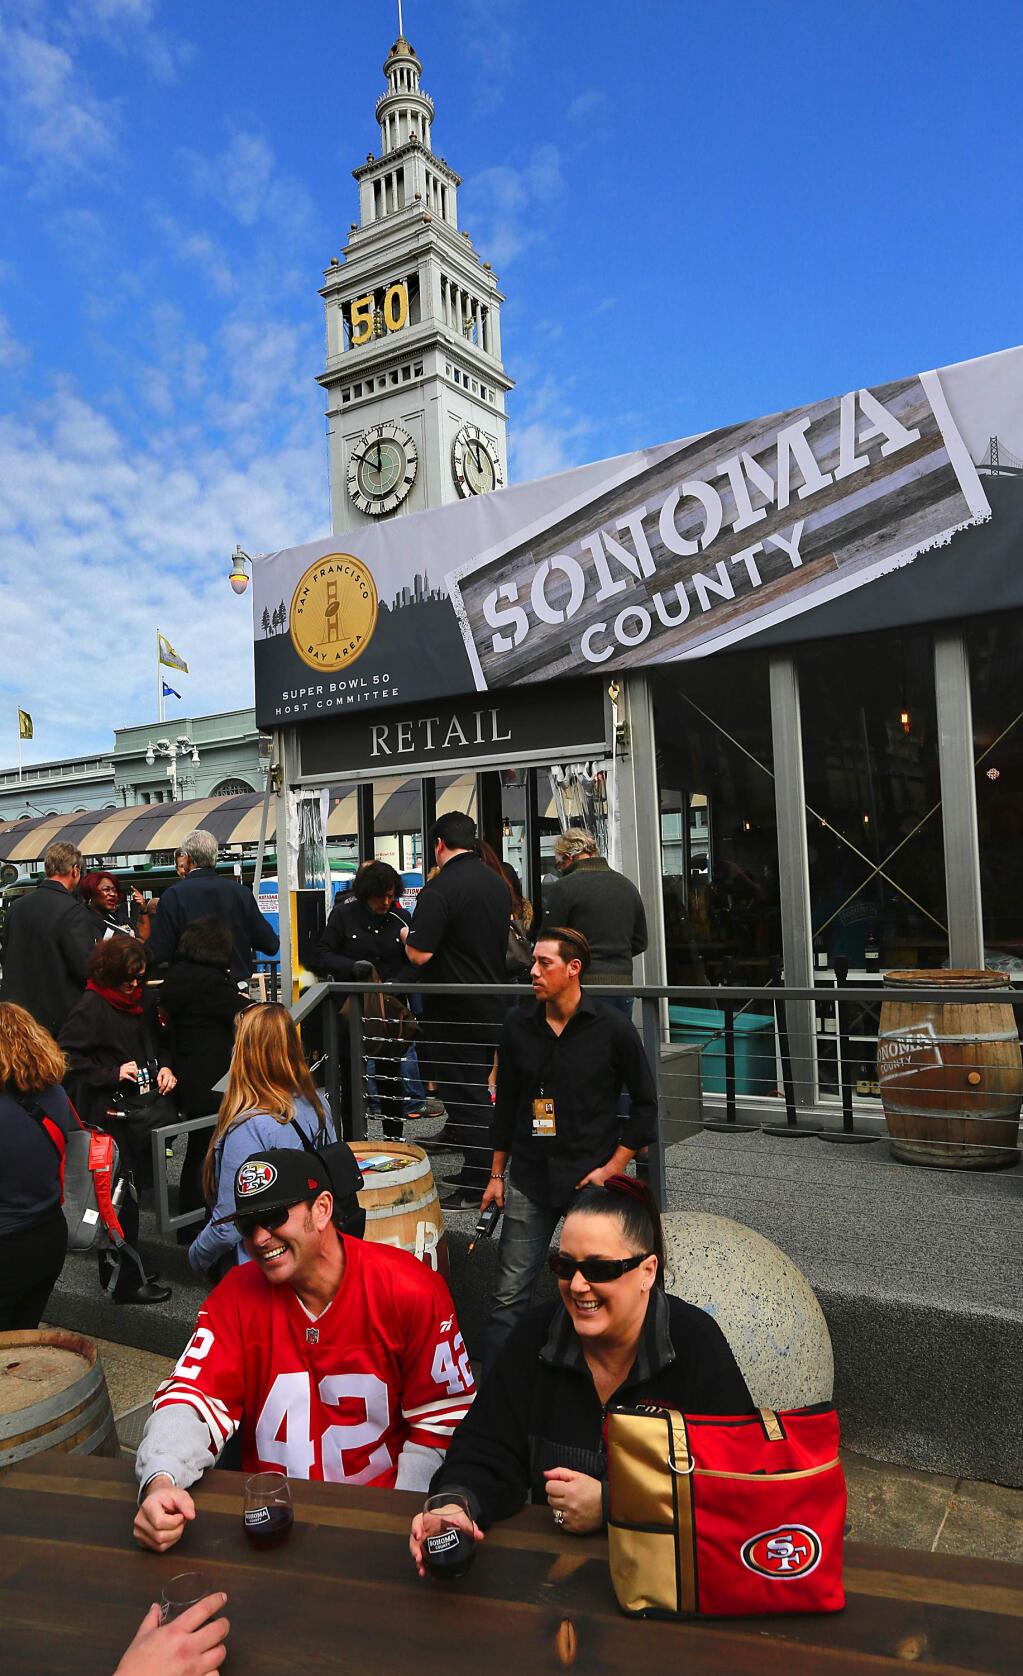 Paul, left, and Cheryl Pollino of Concord taste Sonoma County wines in the outside seating area at the Sonoma County wine and tourism tent in San Francisco's Super Bowl City. (JOHN BURGESS / The Press Democrat)